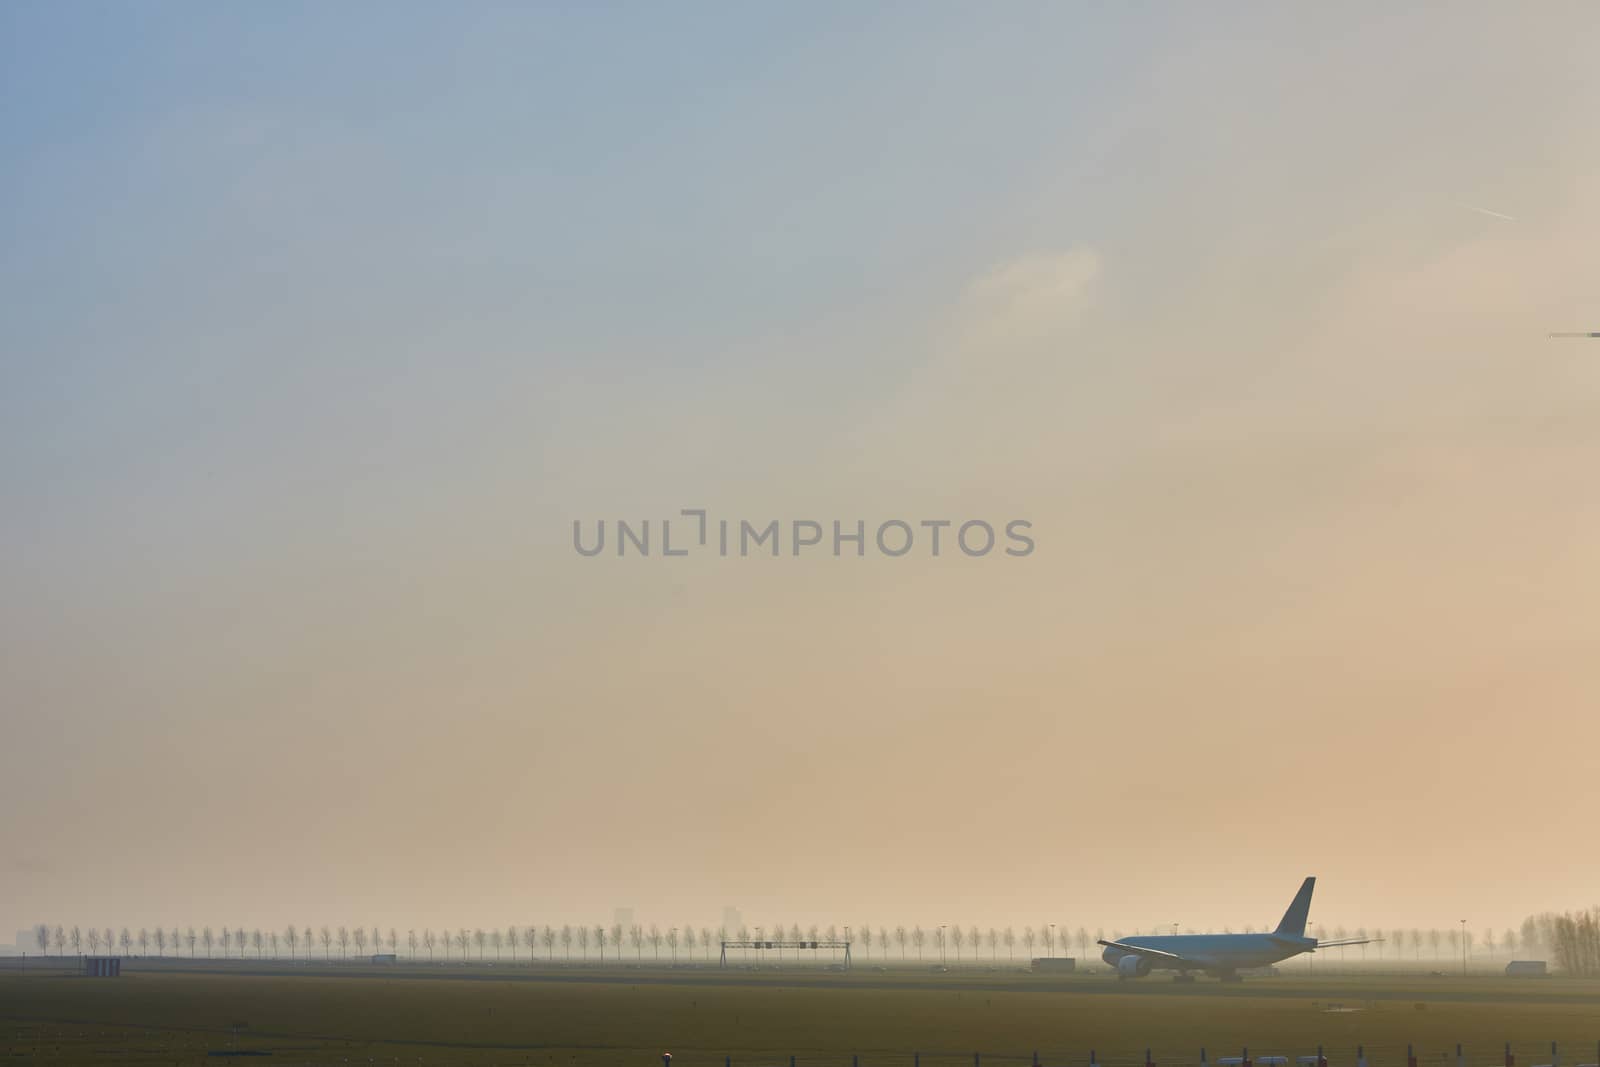  The Airplane departing from Amsterdam Airport Schiphol.